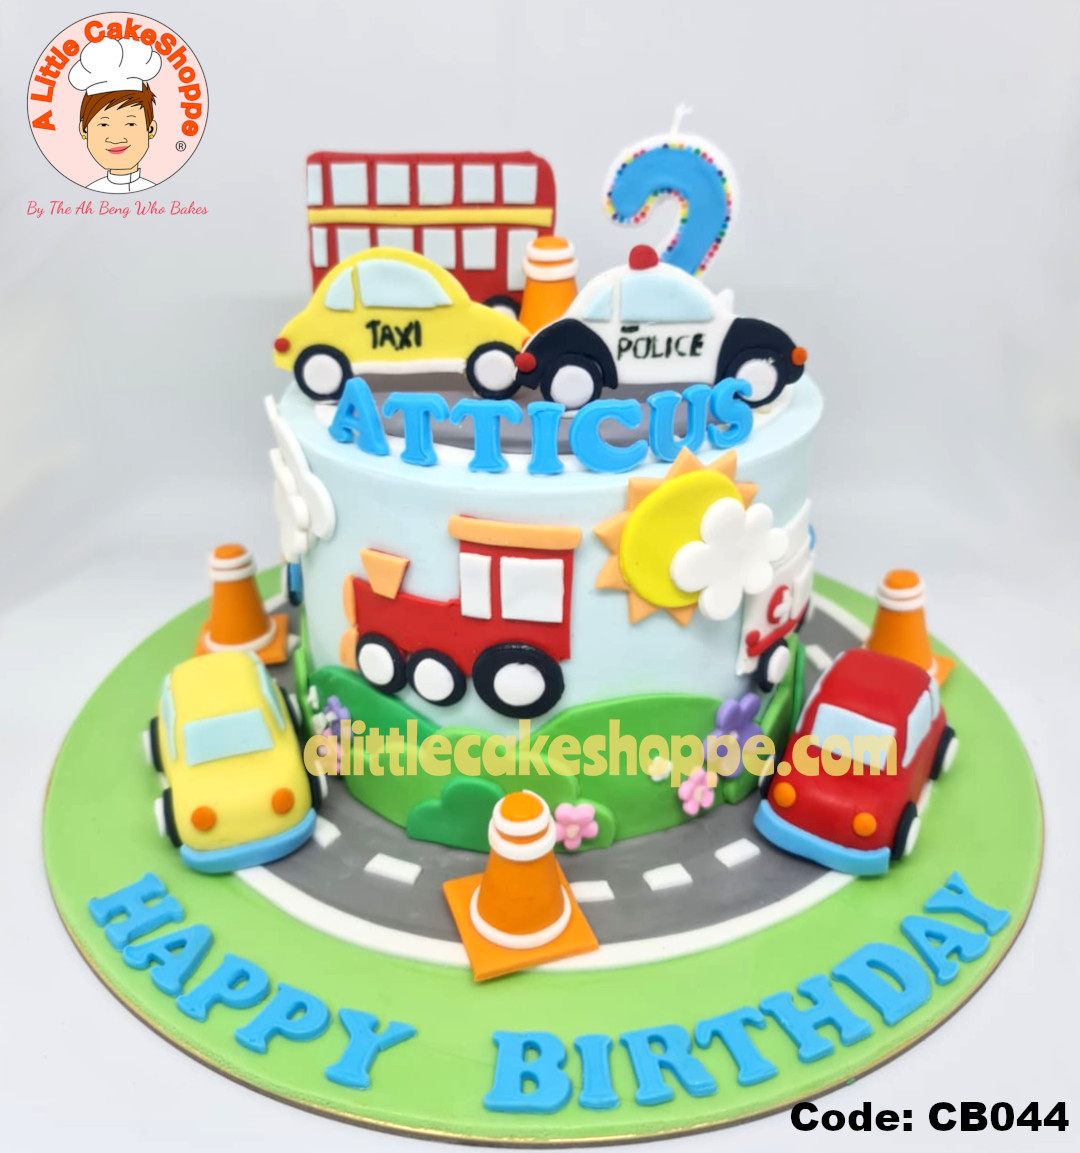 Best Cake Shop Singapore Delivery Best Customised Cake Shop Singapore customise cake custom cake 2D 3D birthday cake cupcakes desserts wedding corporate events anniversary 1st birthday 21st birthday fondant fresh cream buttercream cakes alittlecakeshoppe a little cake shoppe compliments review singapore bakers SG cake shop cakeshop ah beng who bakes sgbakes novelty cakes sgcakes licensed sfa nea cake delivery celebration cakes kids birthday cake surprise cake adult children parenting police car cake